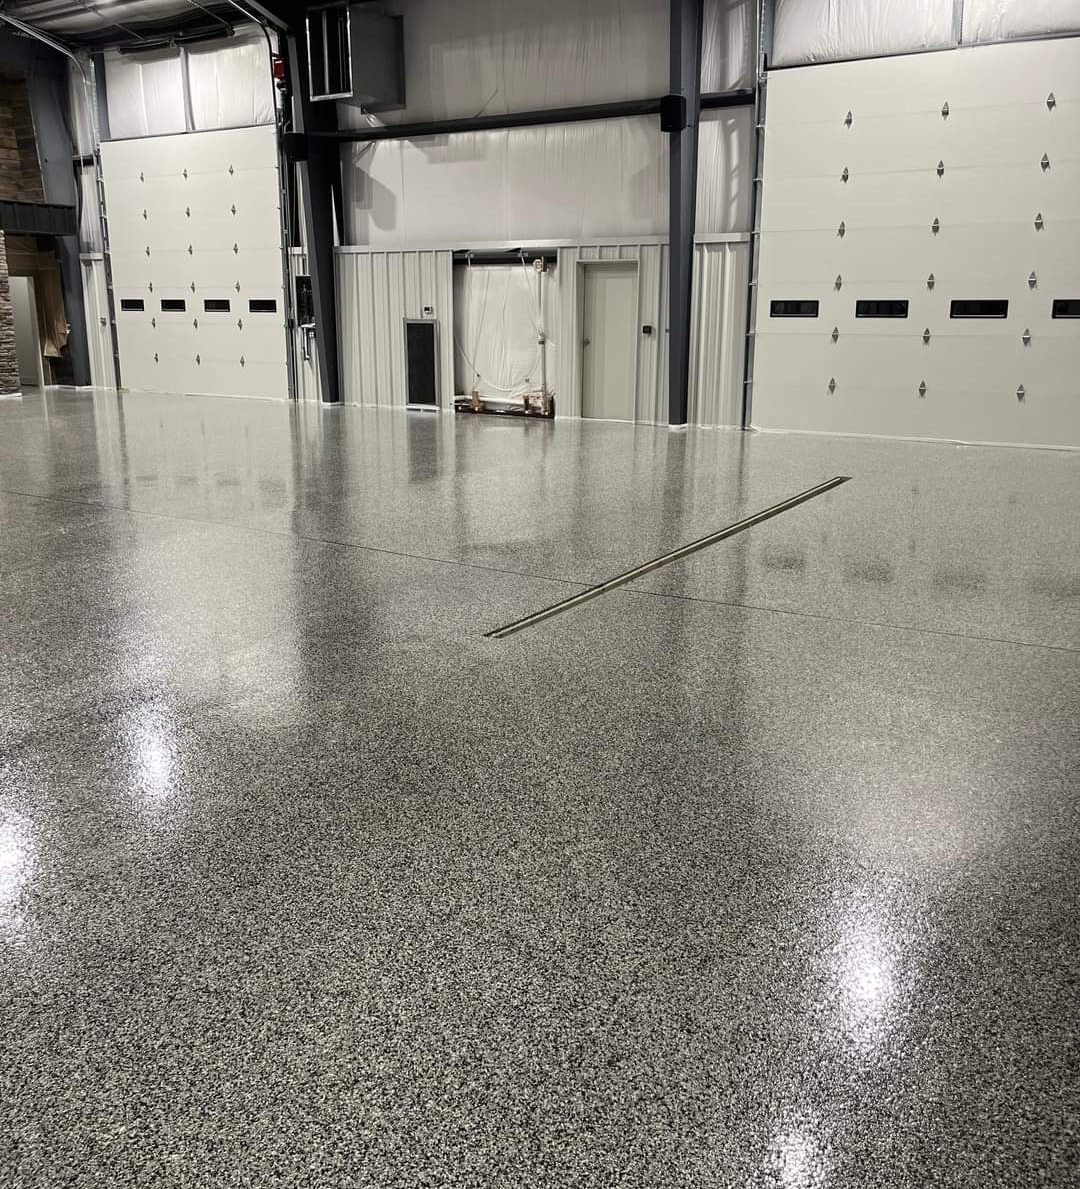 This garage has a simple but stunning epoxy floor.